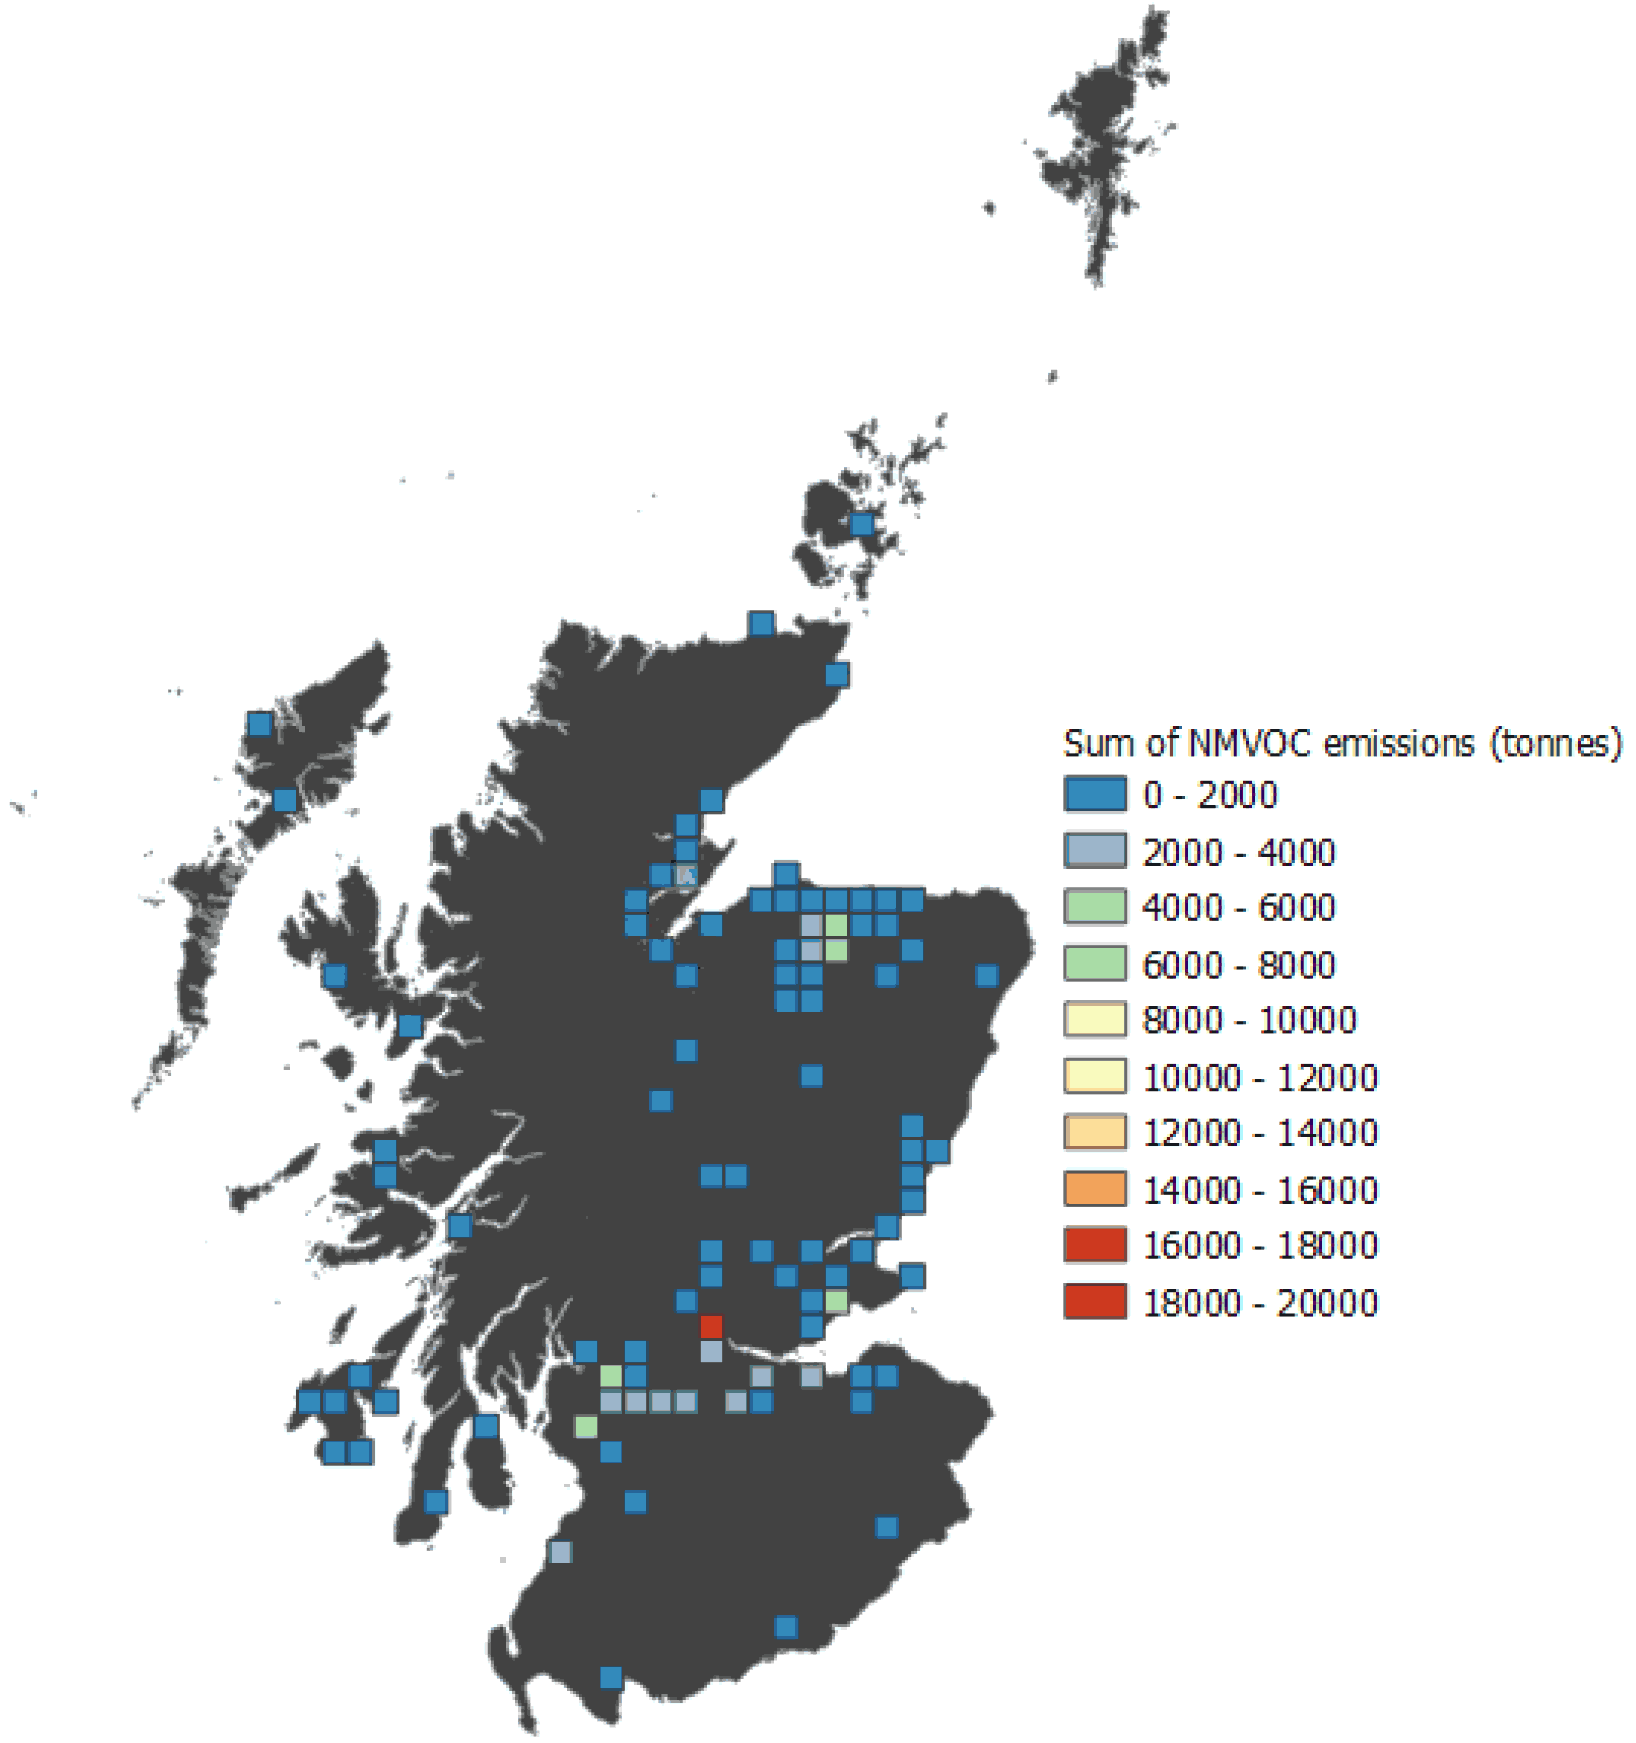 Scotland divided into 10km x 10km grid squares showing total NMVOC emissions in each grid square.